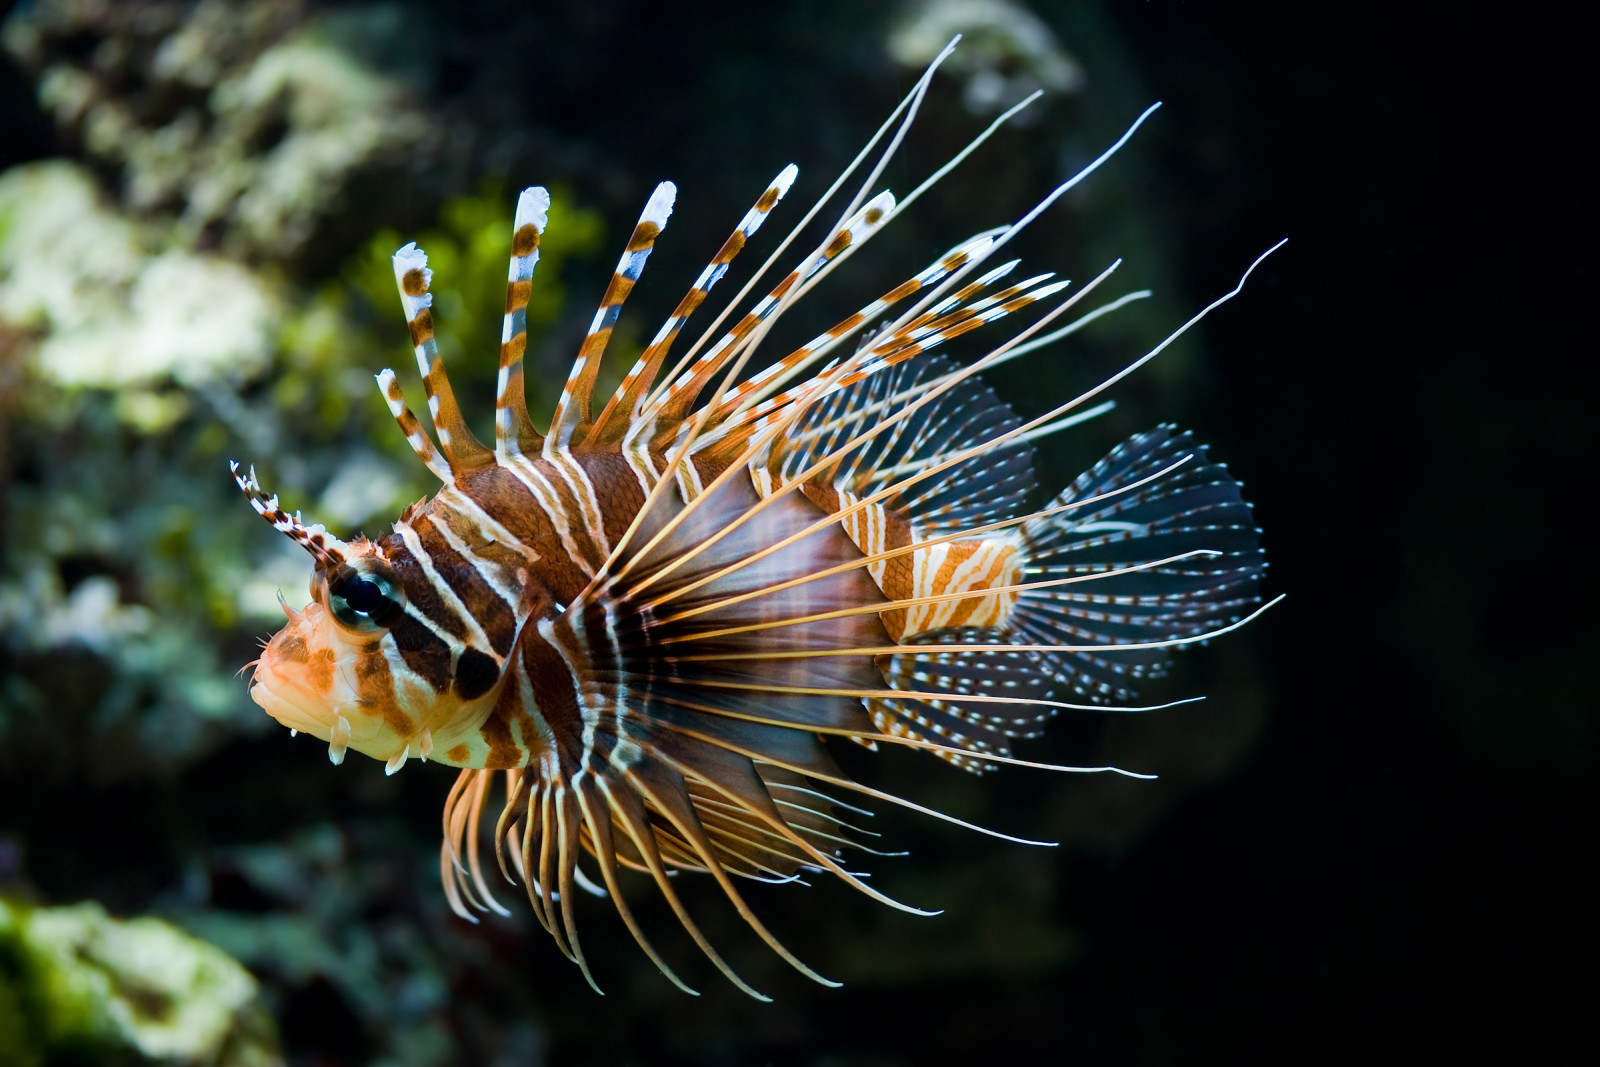 ikan, lionfish, Volter Pterois